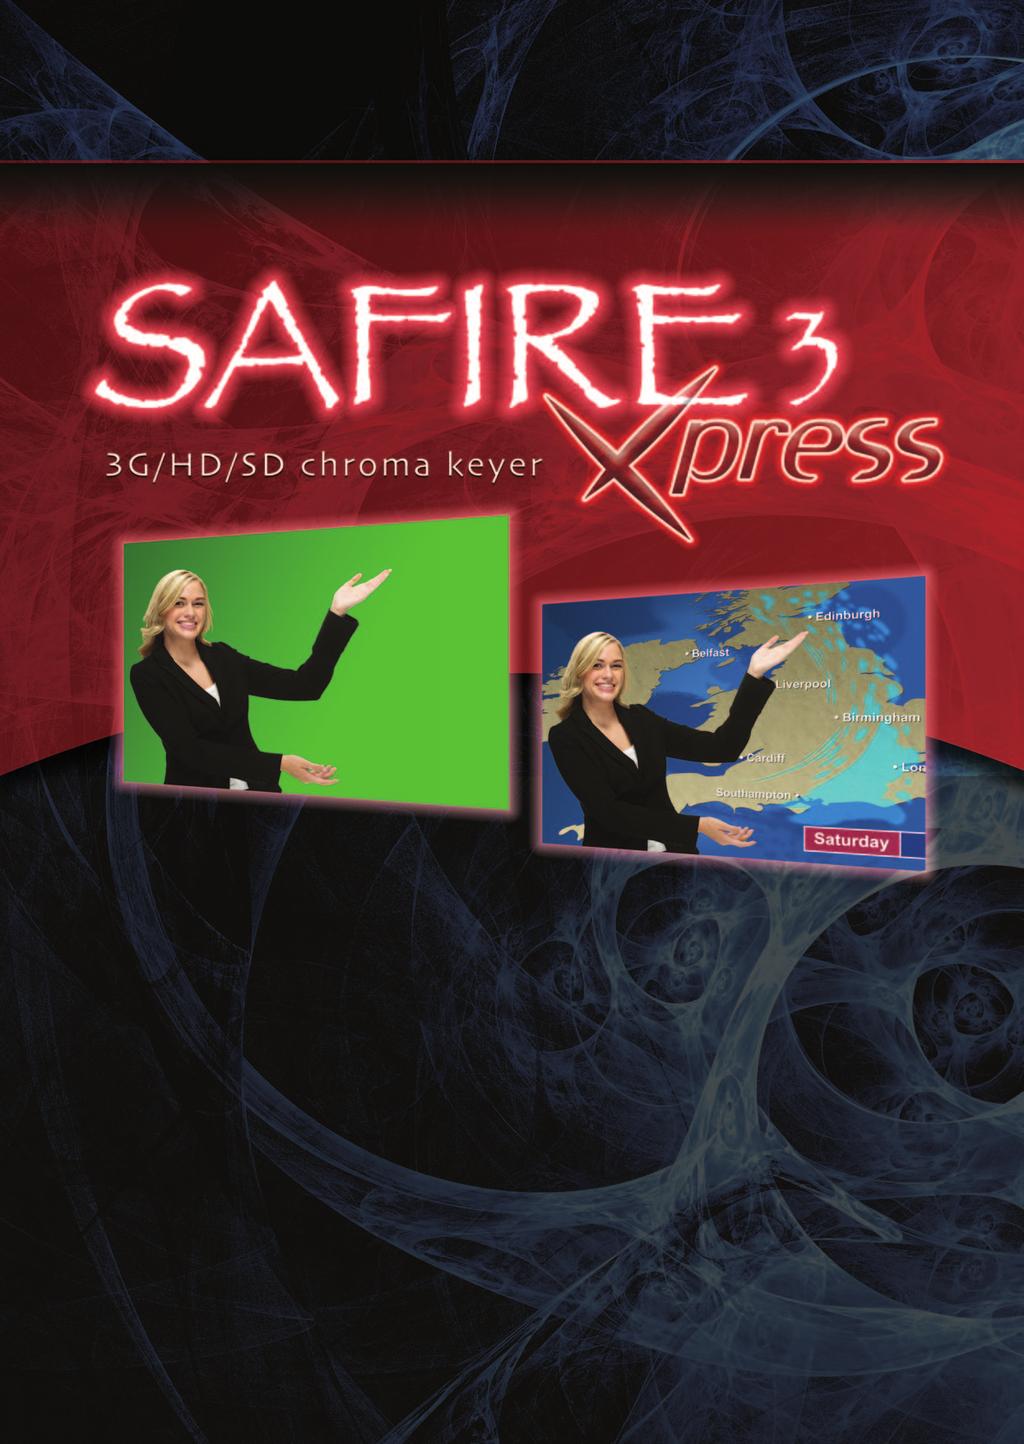 Safire 3 Xpress is a real-time chroma keyer ideal for weather, news bureaus and other single static camera applications that use simple backgrounds rather than a full virtual set.